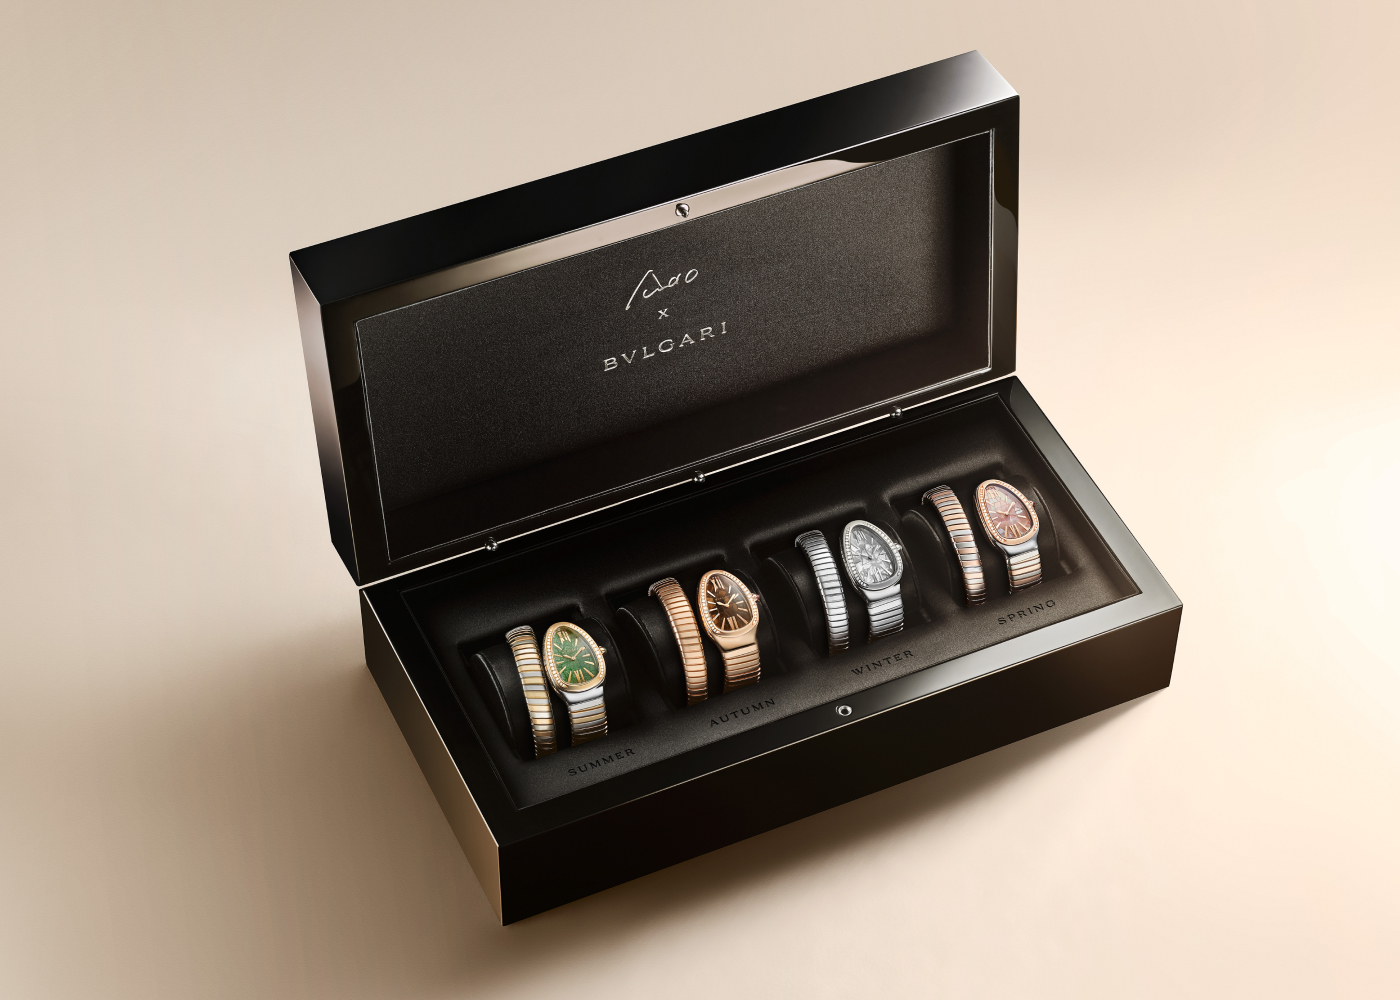 Bulgari Tadao Ando x Serpenti watches in gold, rose gold, white gold, green aventurine, tiger's eye, white and pink mother-of-pearl and diamond